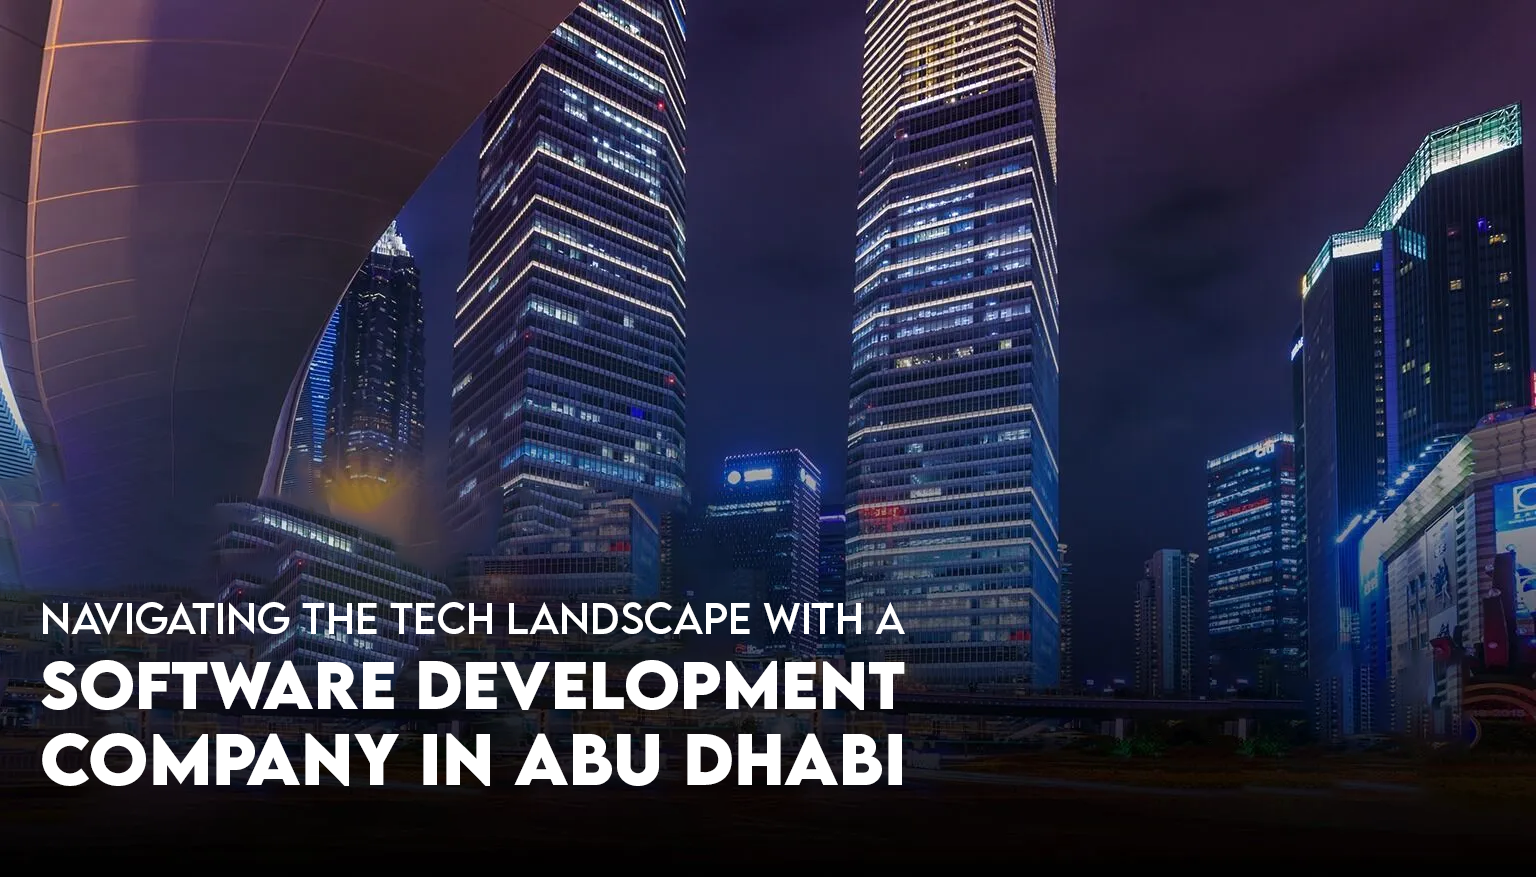 Navigating the Tech Landscape with a Software Development Company in Abu Dhabi